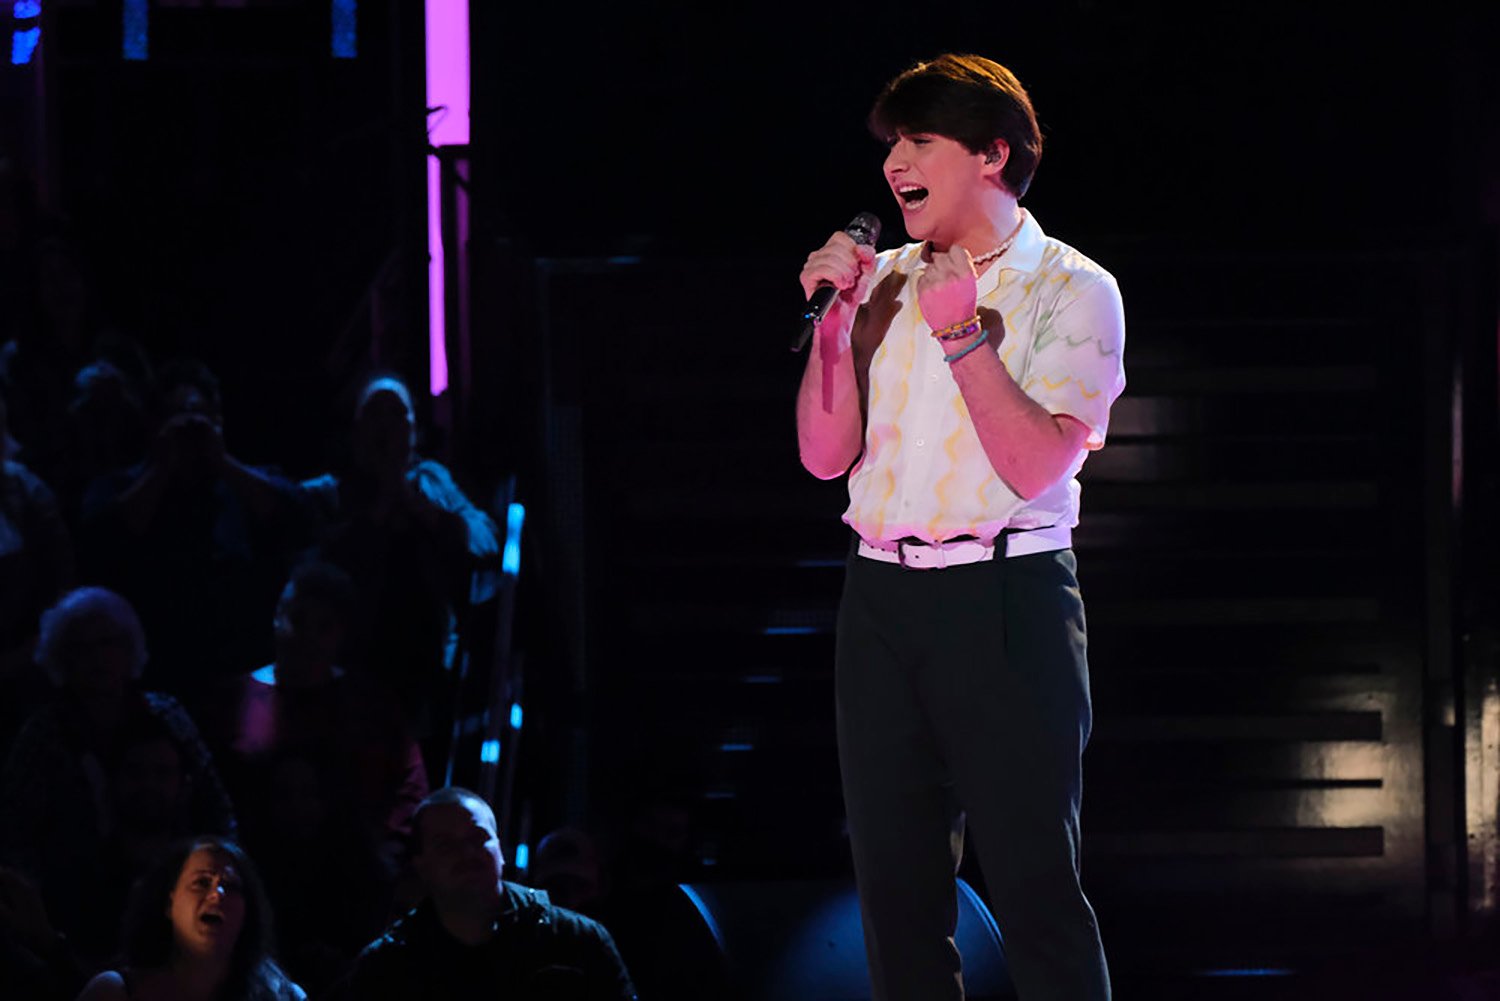 Kique performs on The Voice wearing black pants and a cream-colored button-down one week before testing positive for COVID.